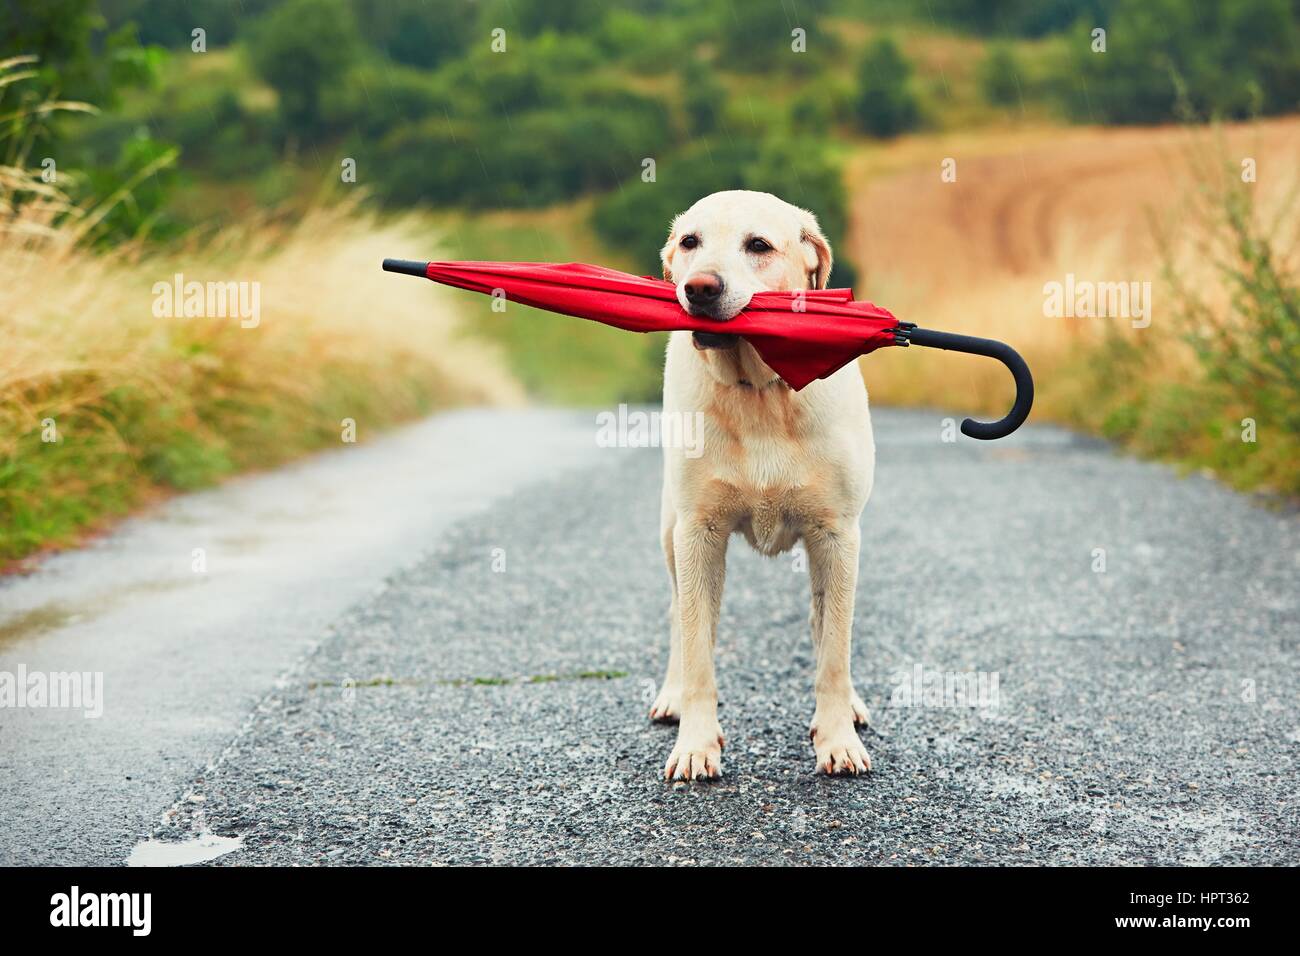 Obedient dog in rainy day. Adorable labrador retriever is holding red umbrella in mouth and waiting for his owner in rain. Stock Photo